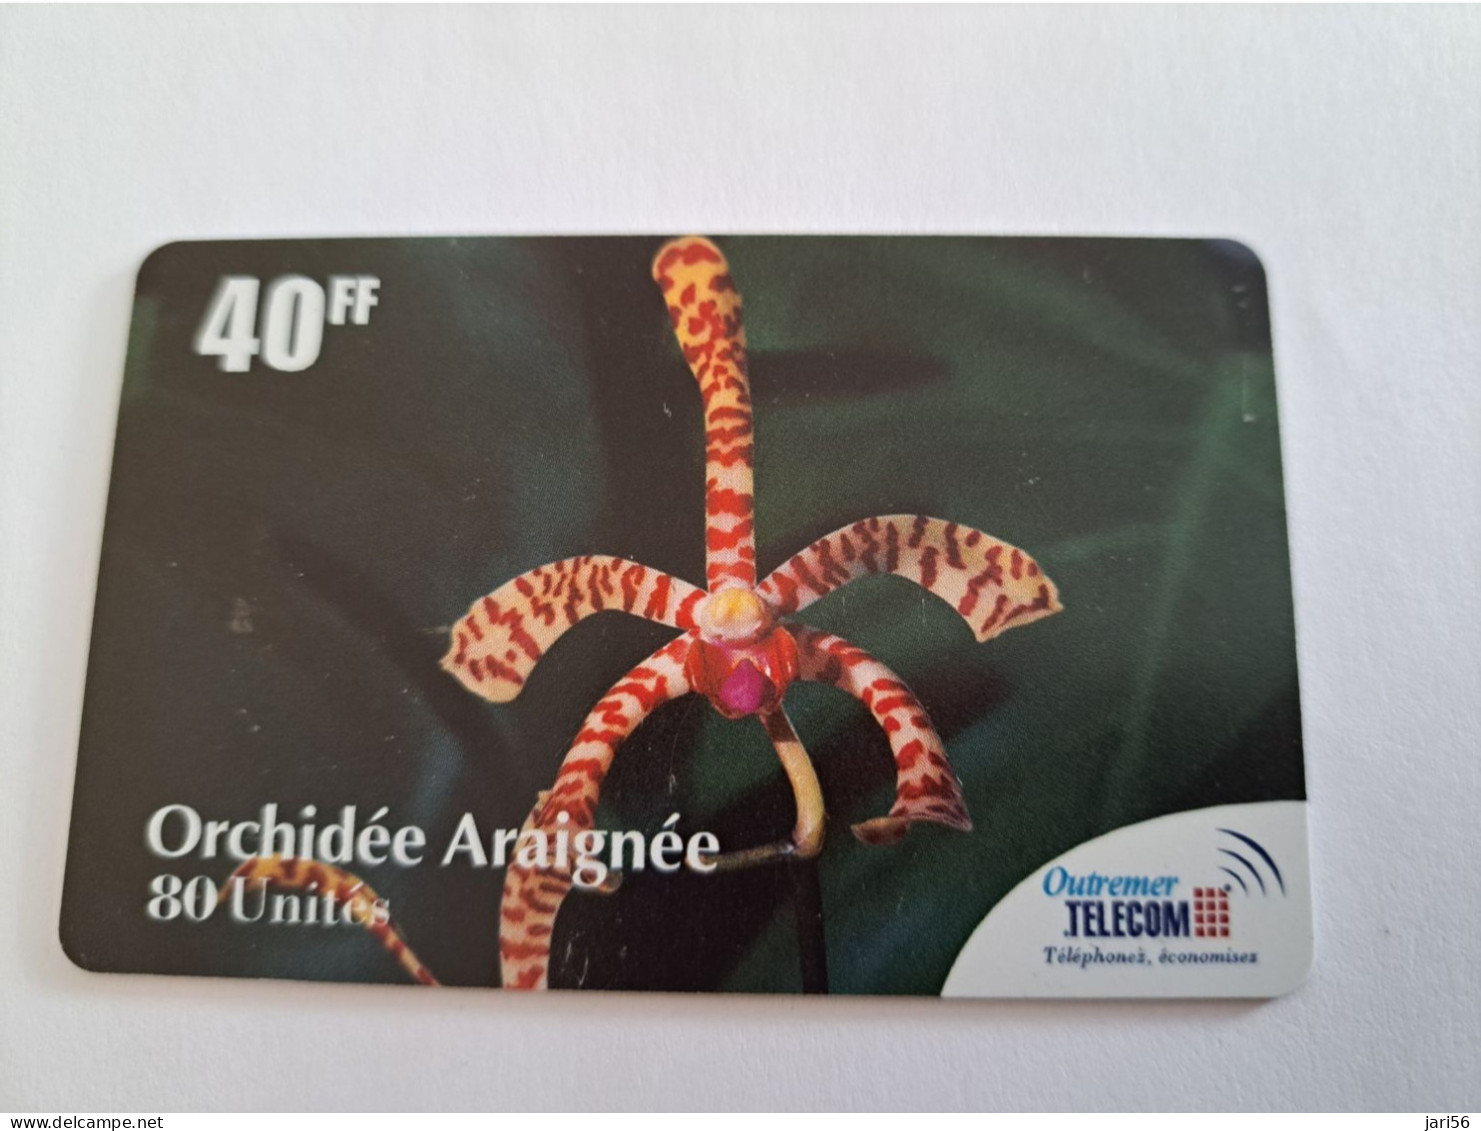 ST MARTIN  / OUTREMER/ FLOWERS/ ORCHIDEE ARAIGNEE   / 40 FF/ 80  UNITS / ANTF-OT51  FINE USED CARD    ** 13919 ** - Antilles (French)